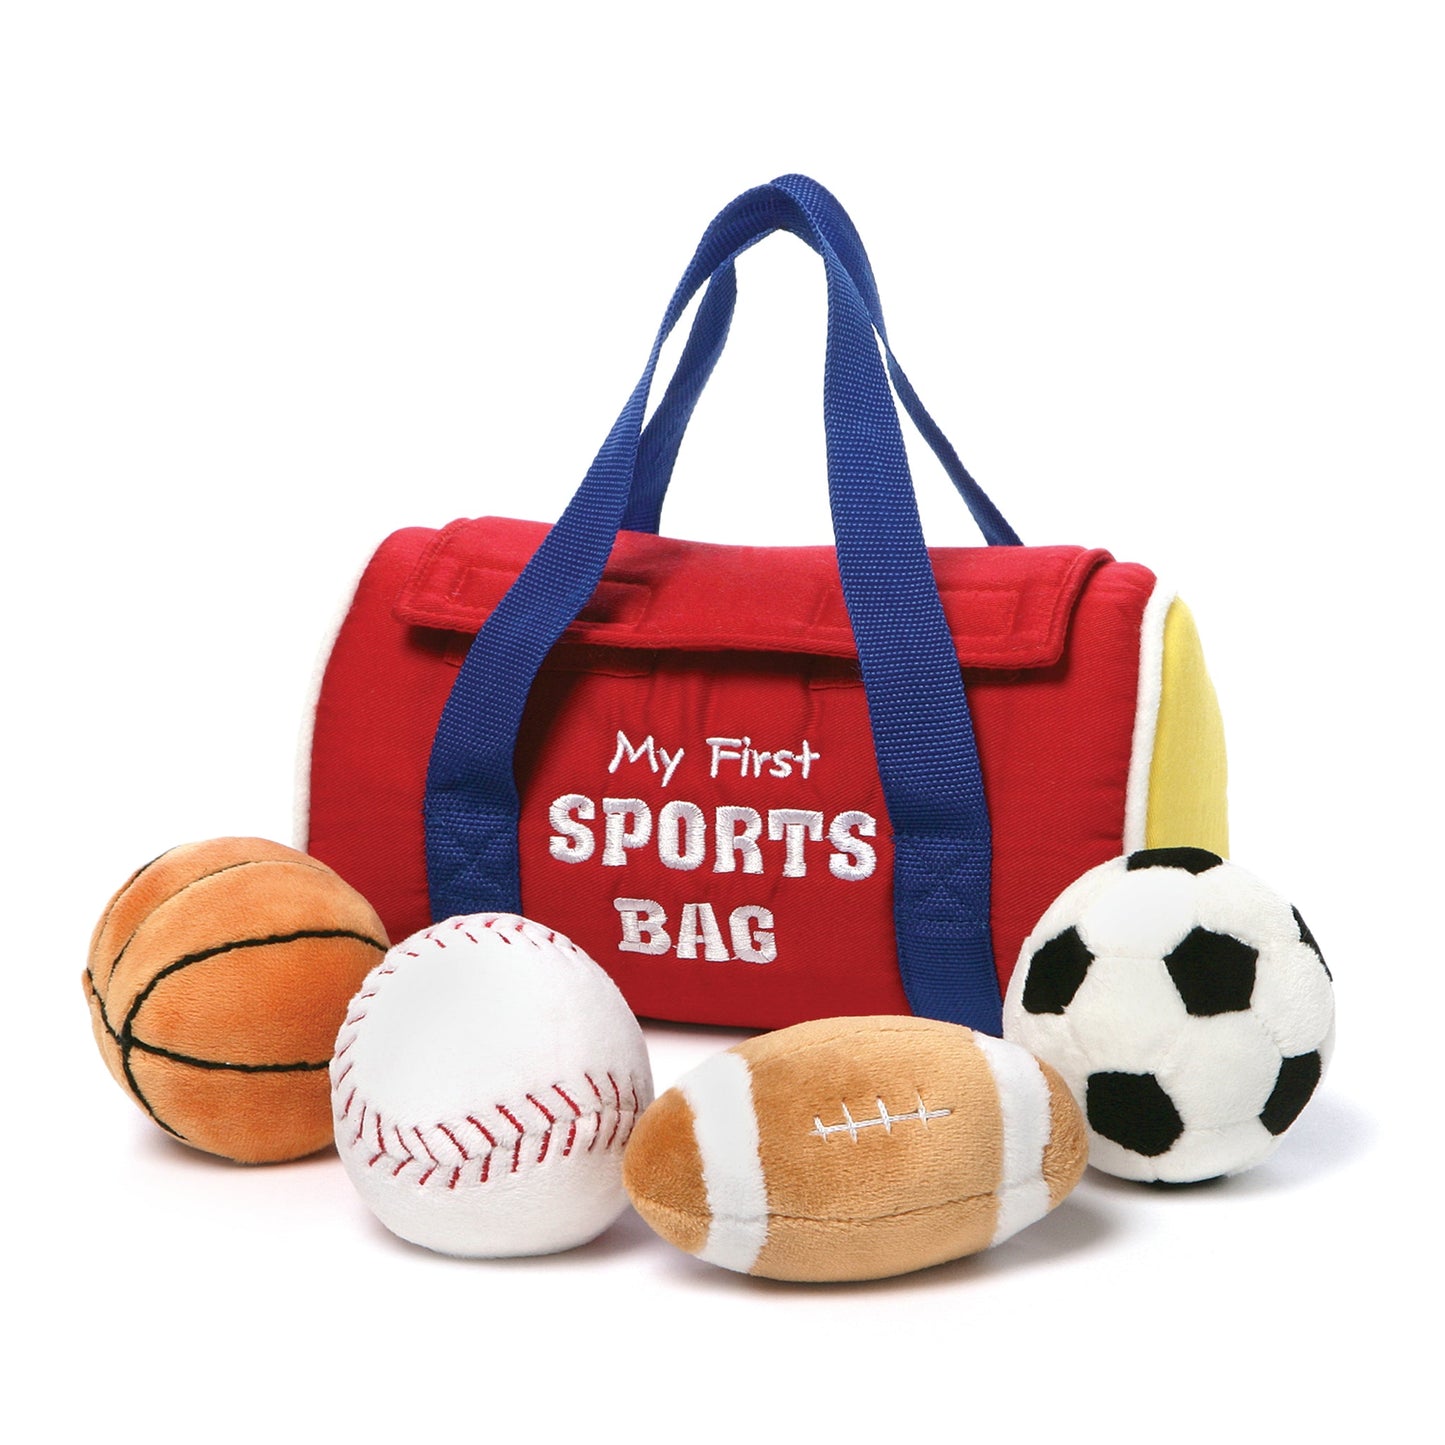 MY FIRST SPORTS BAG PLAYSET, 8 IN